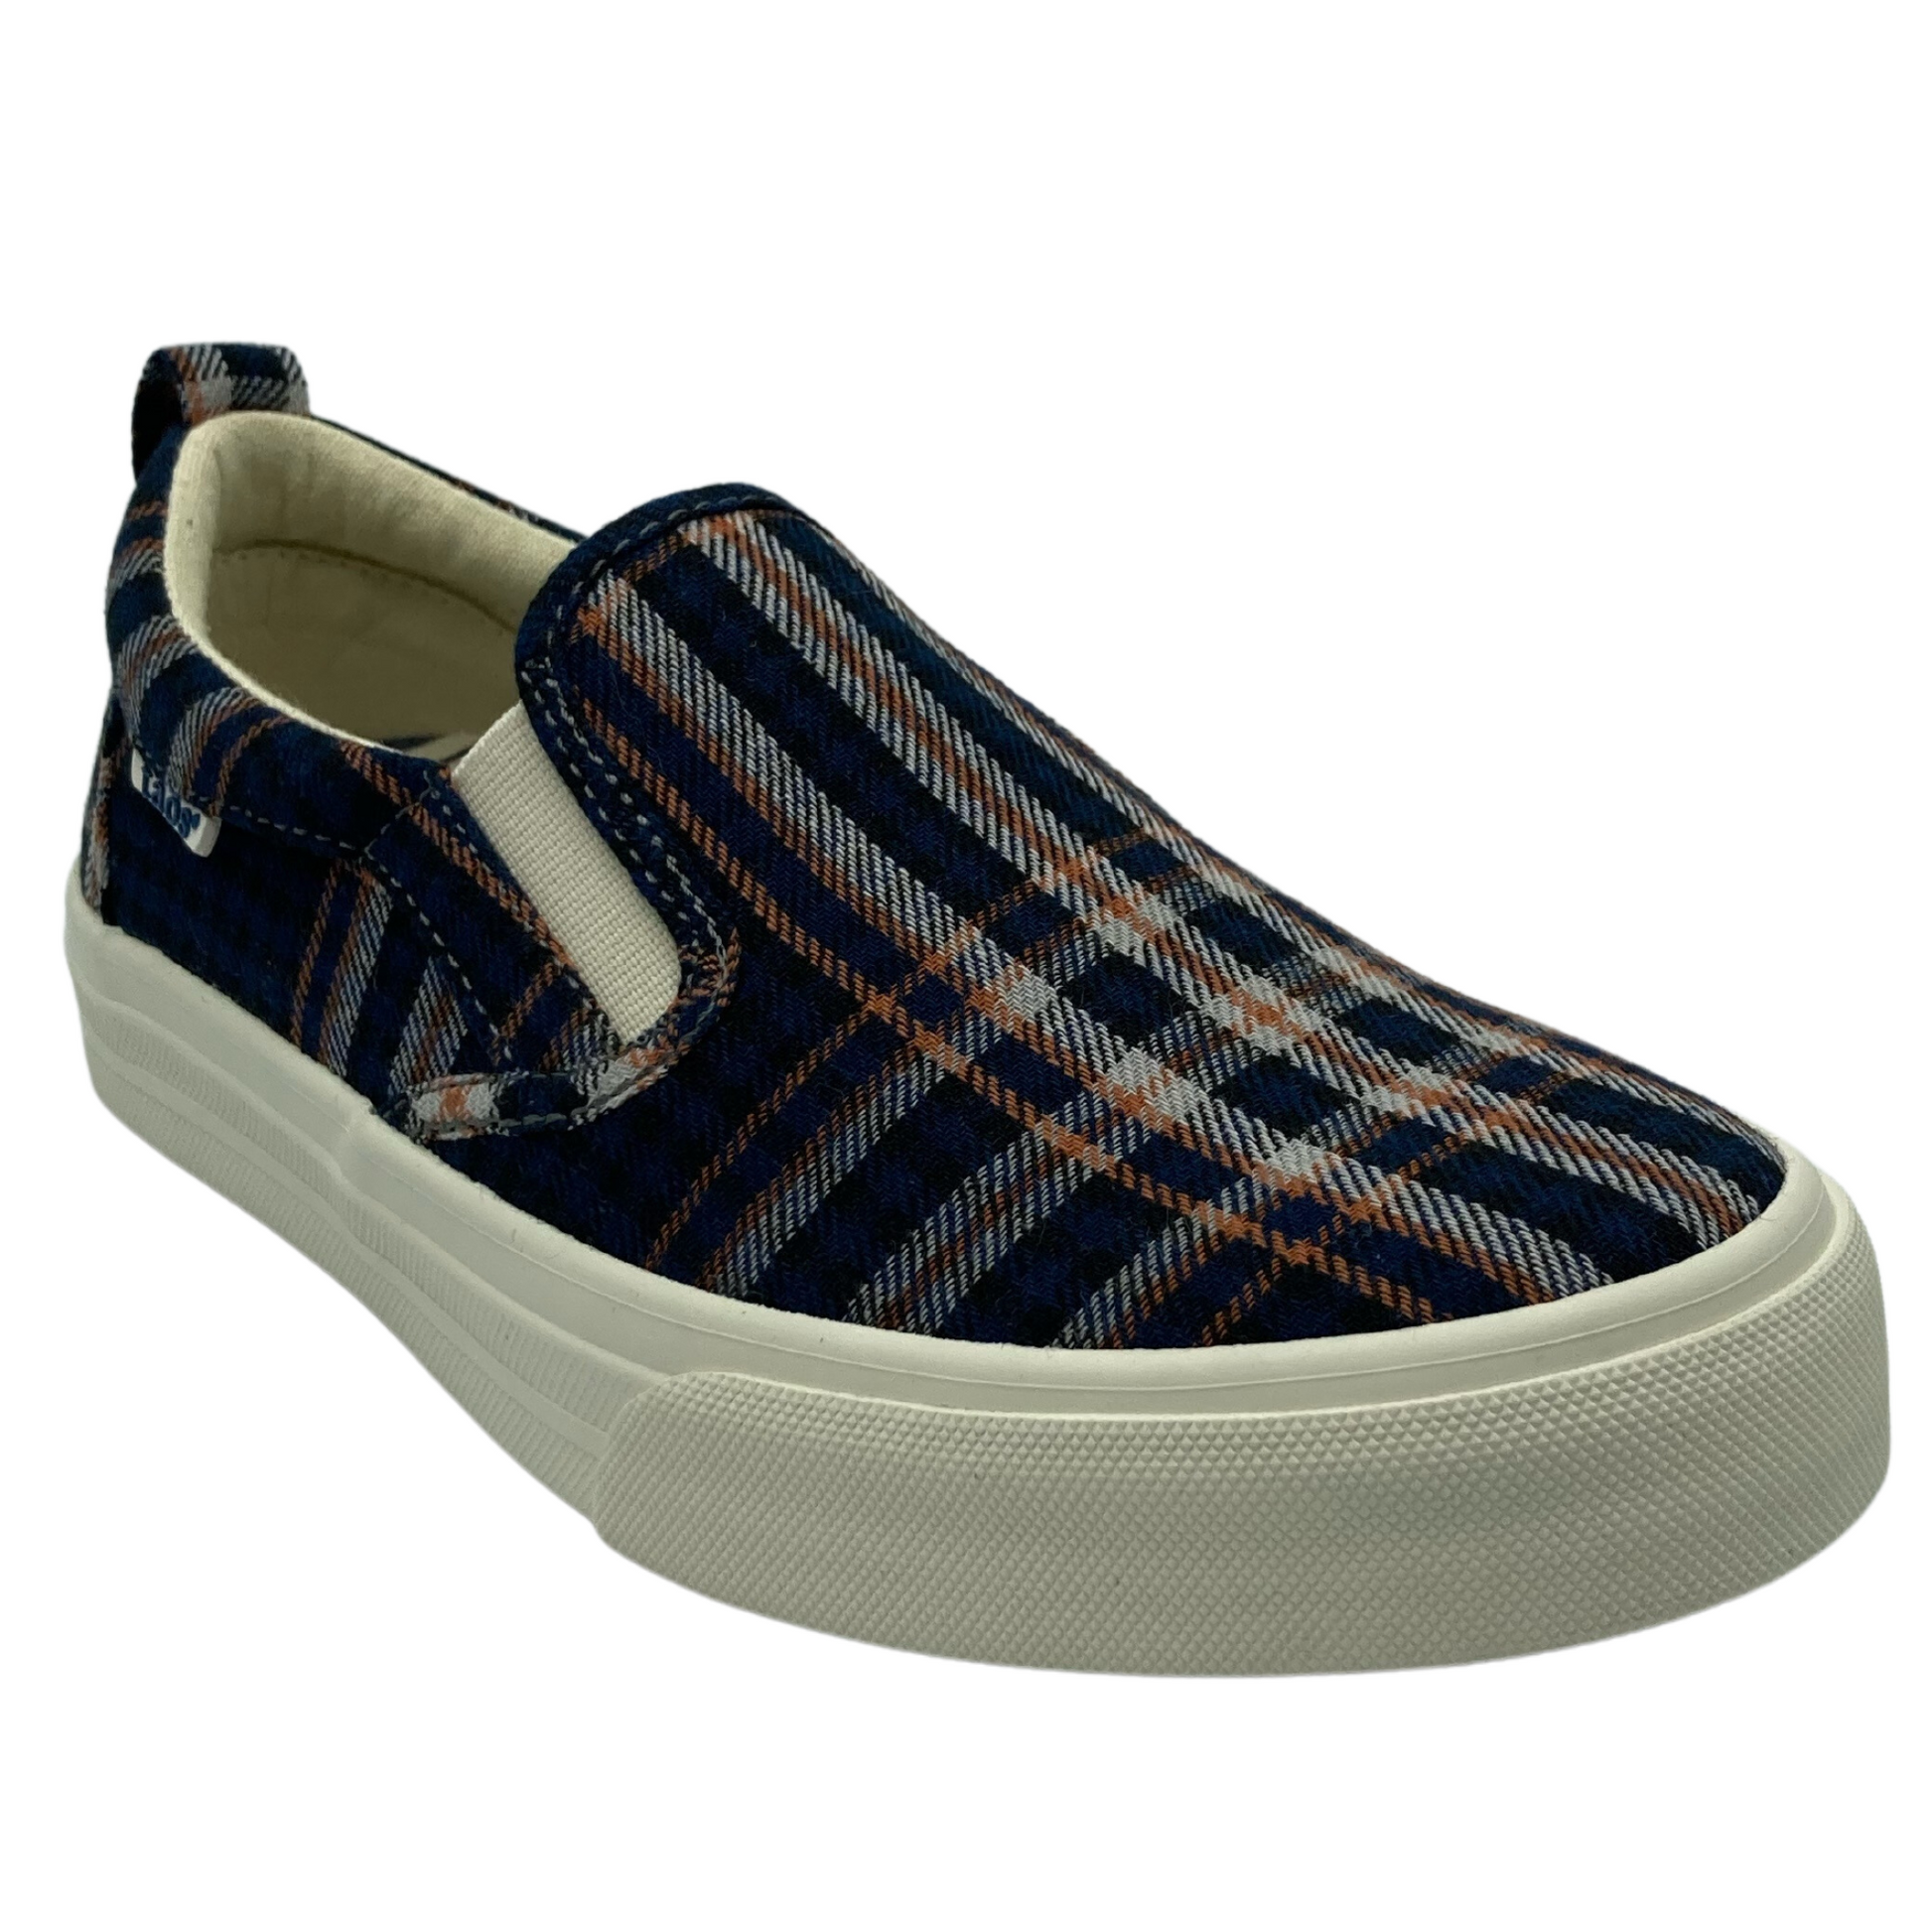 45 degree angled view of blue, orange and white plaid canvas slip on shoe with white rubber platform sole